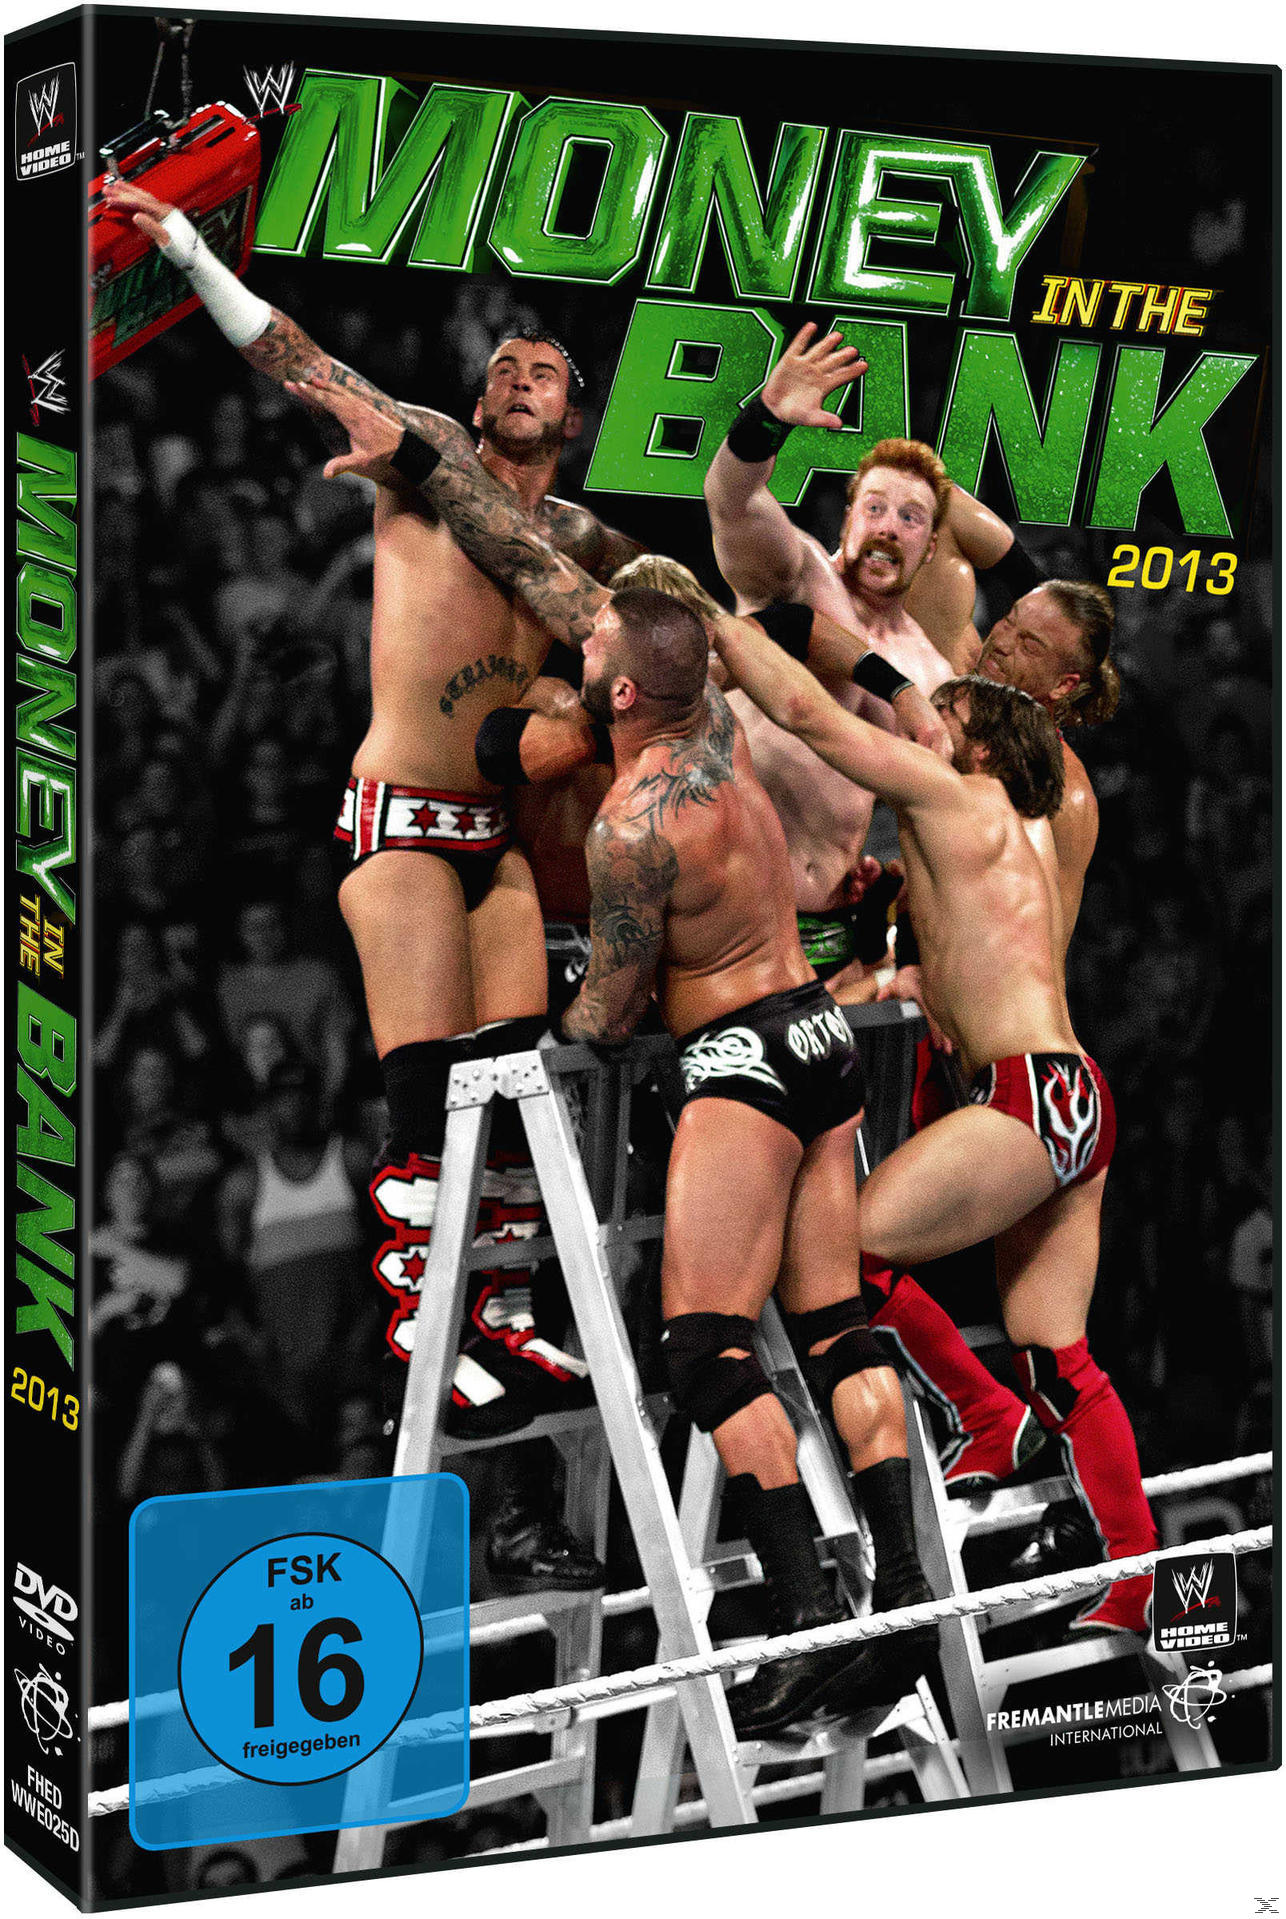 in the 2013 Bank DVD Money